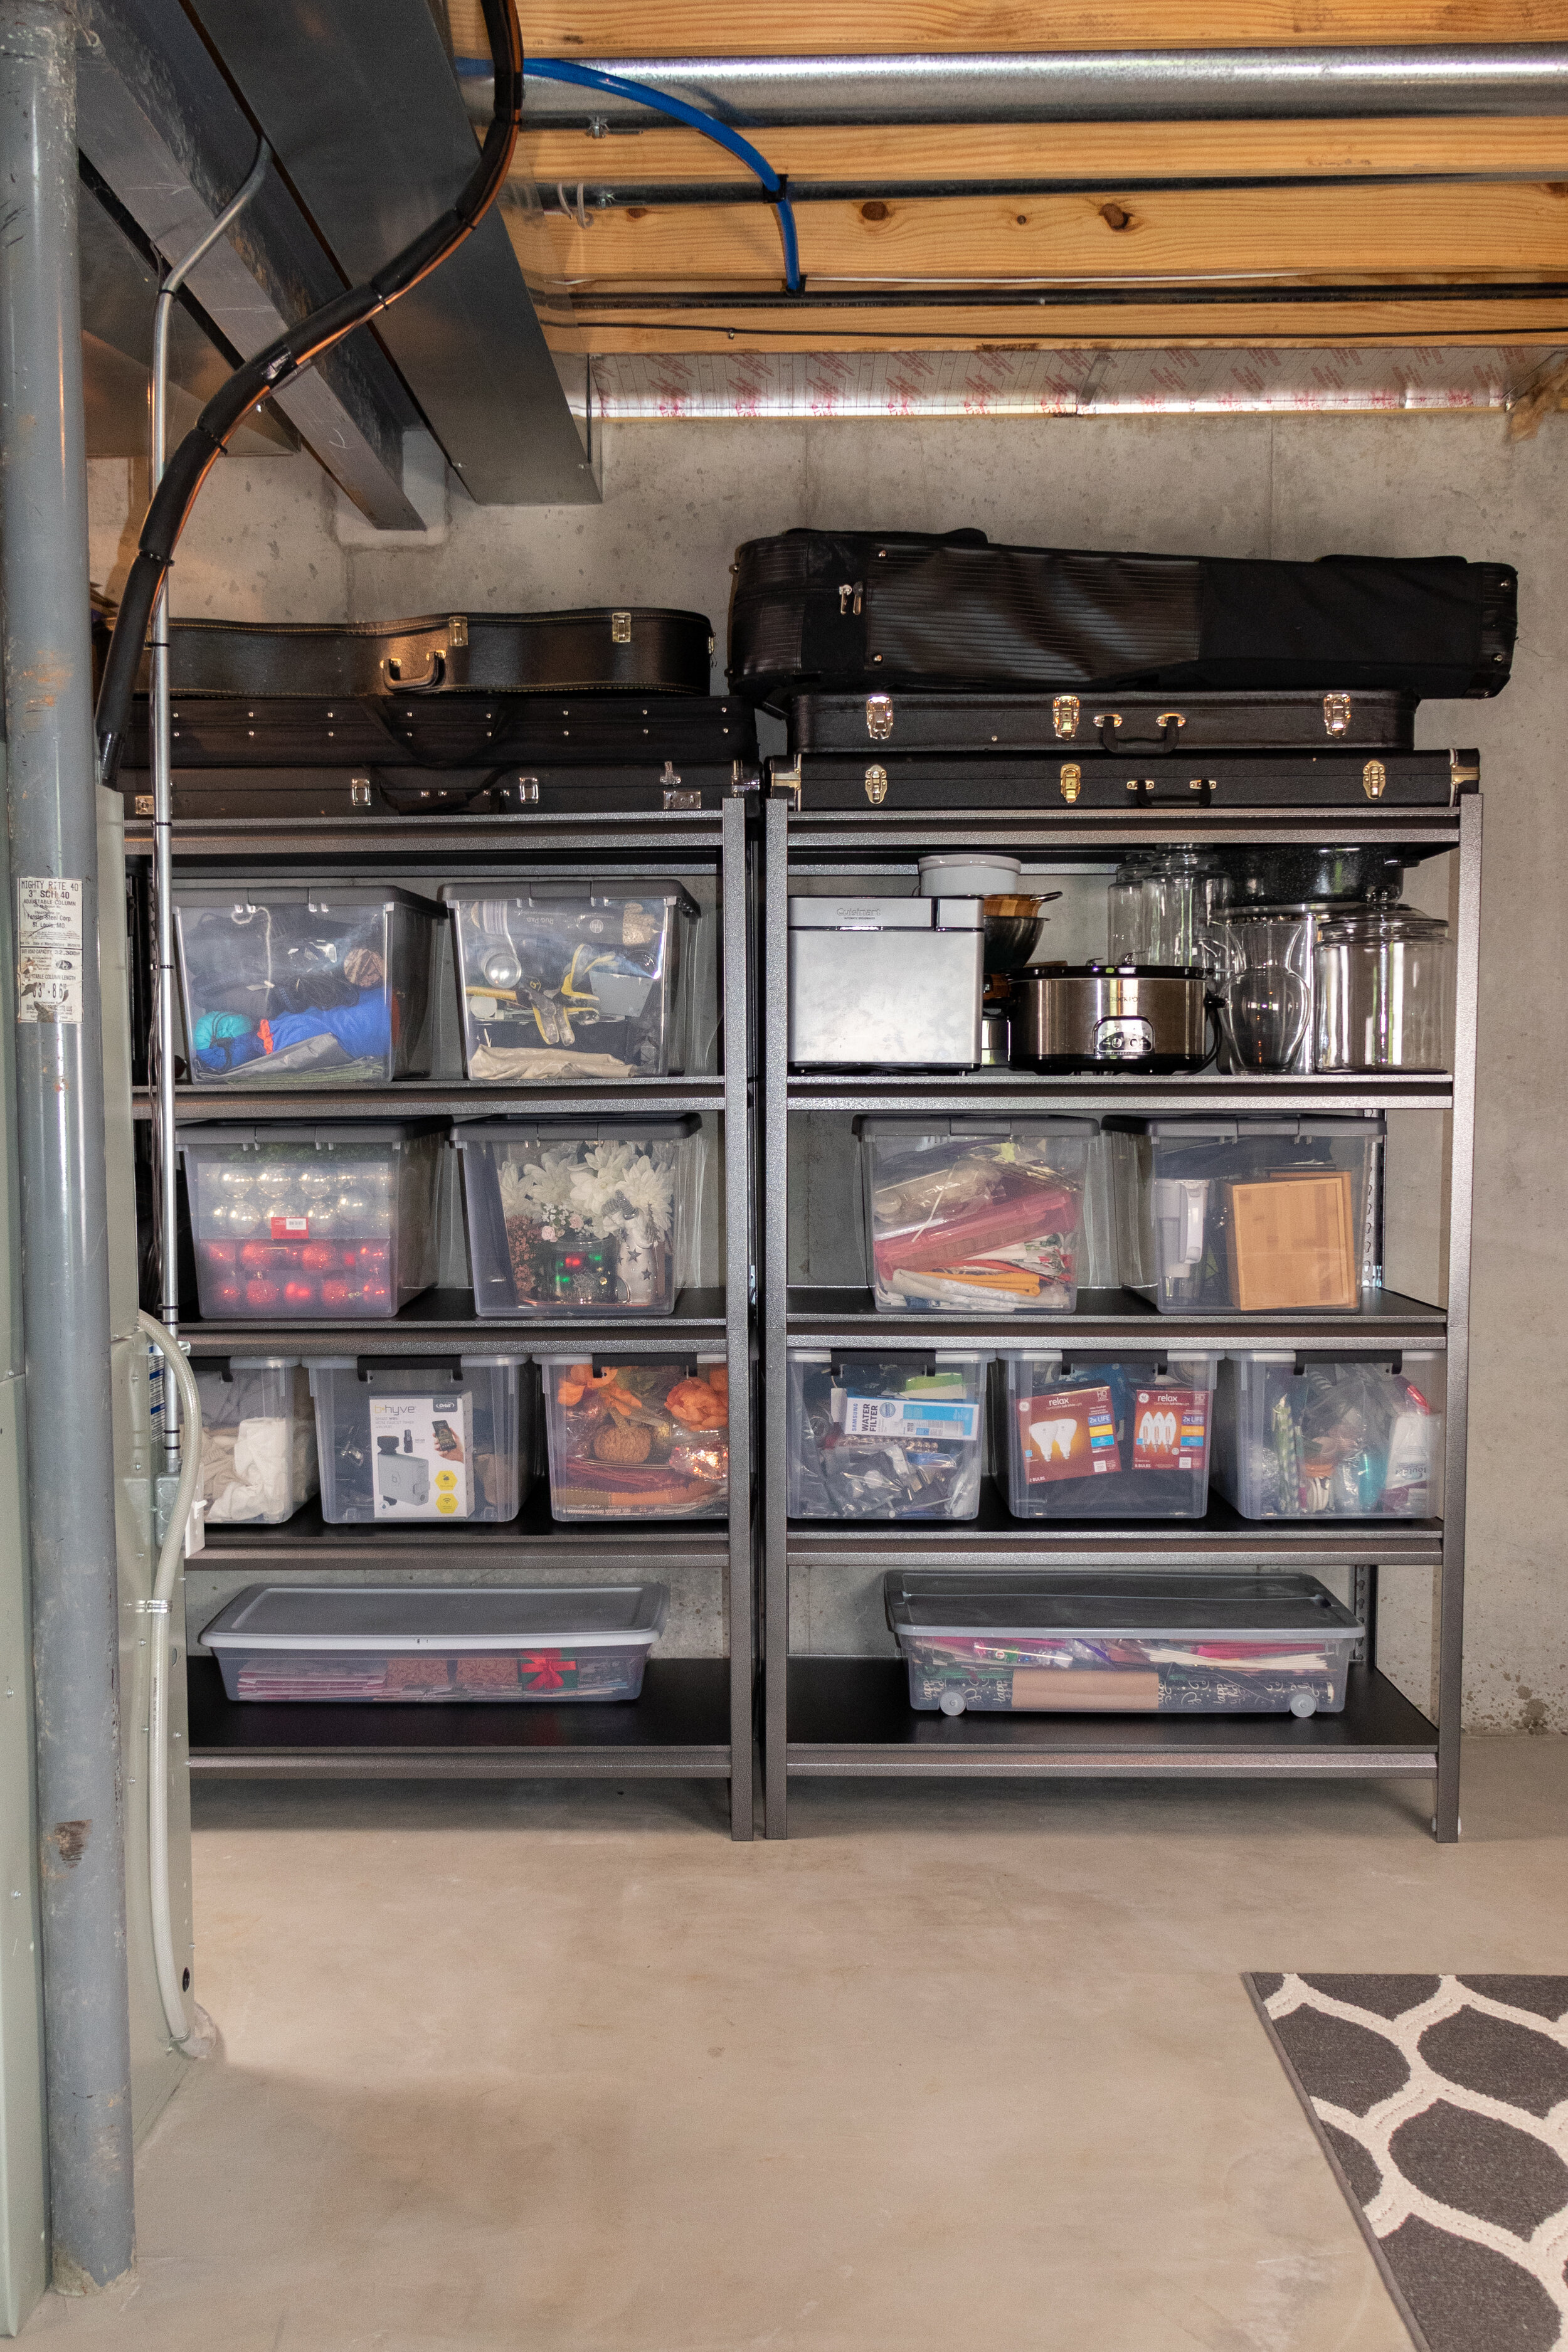 Basement Organization and Storage Ideas After Moving Into a New